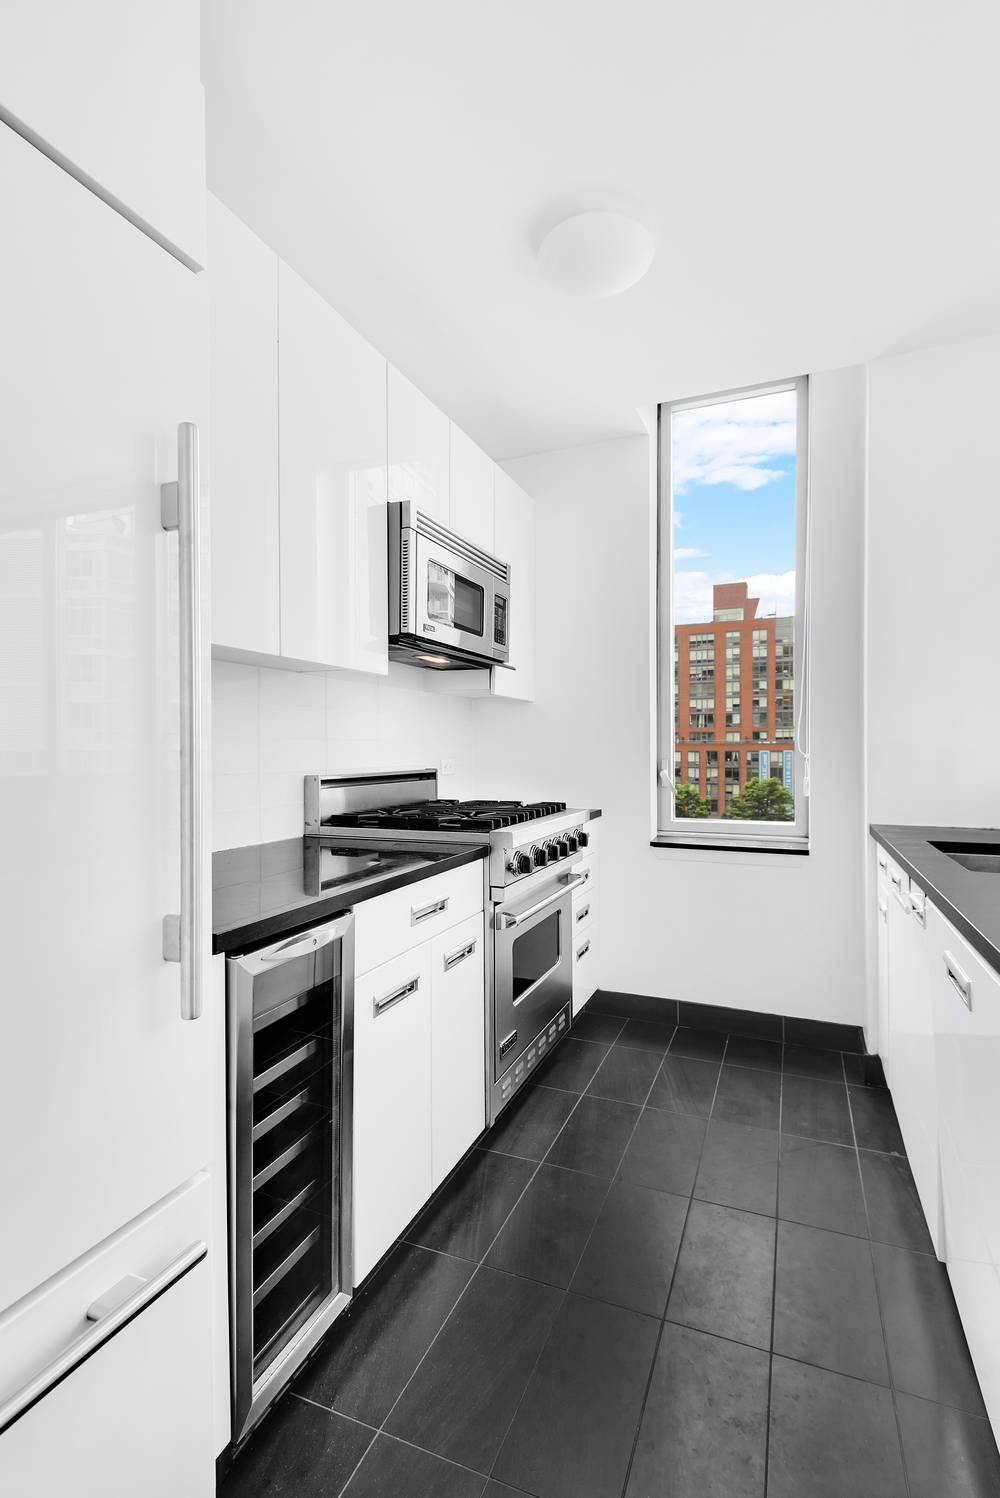 A luminous corner condo rental nestled in the most sought after part of Long Island City, this pristine 3 bedroom, 3 bathroom home boasts a private balcony with incredible views ...